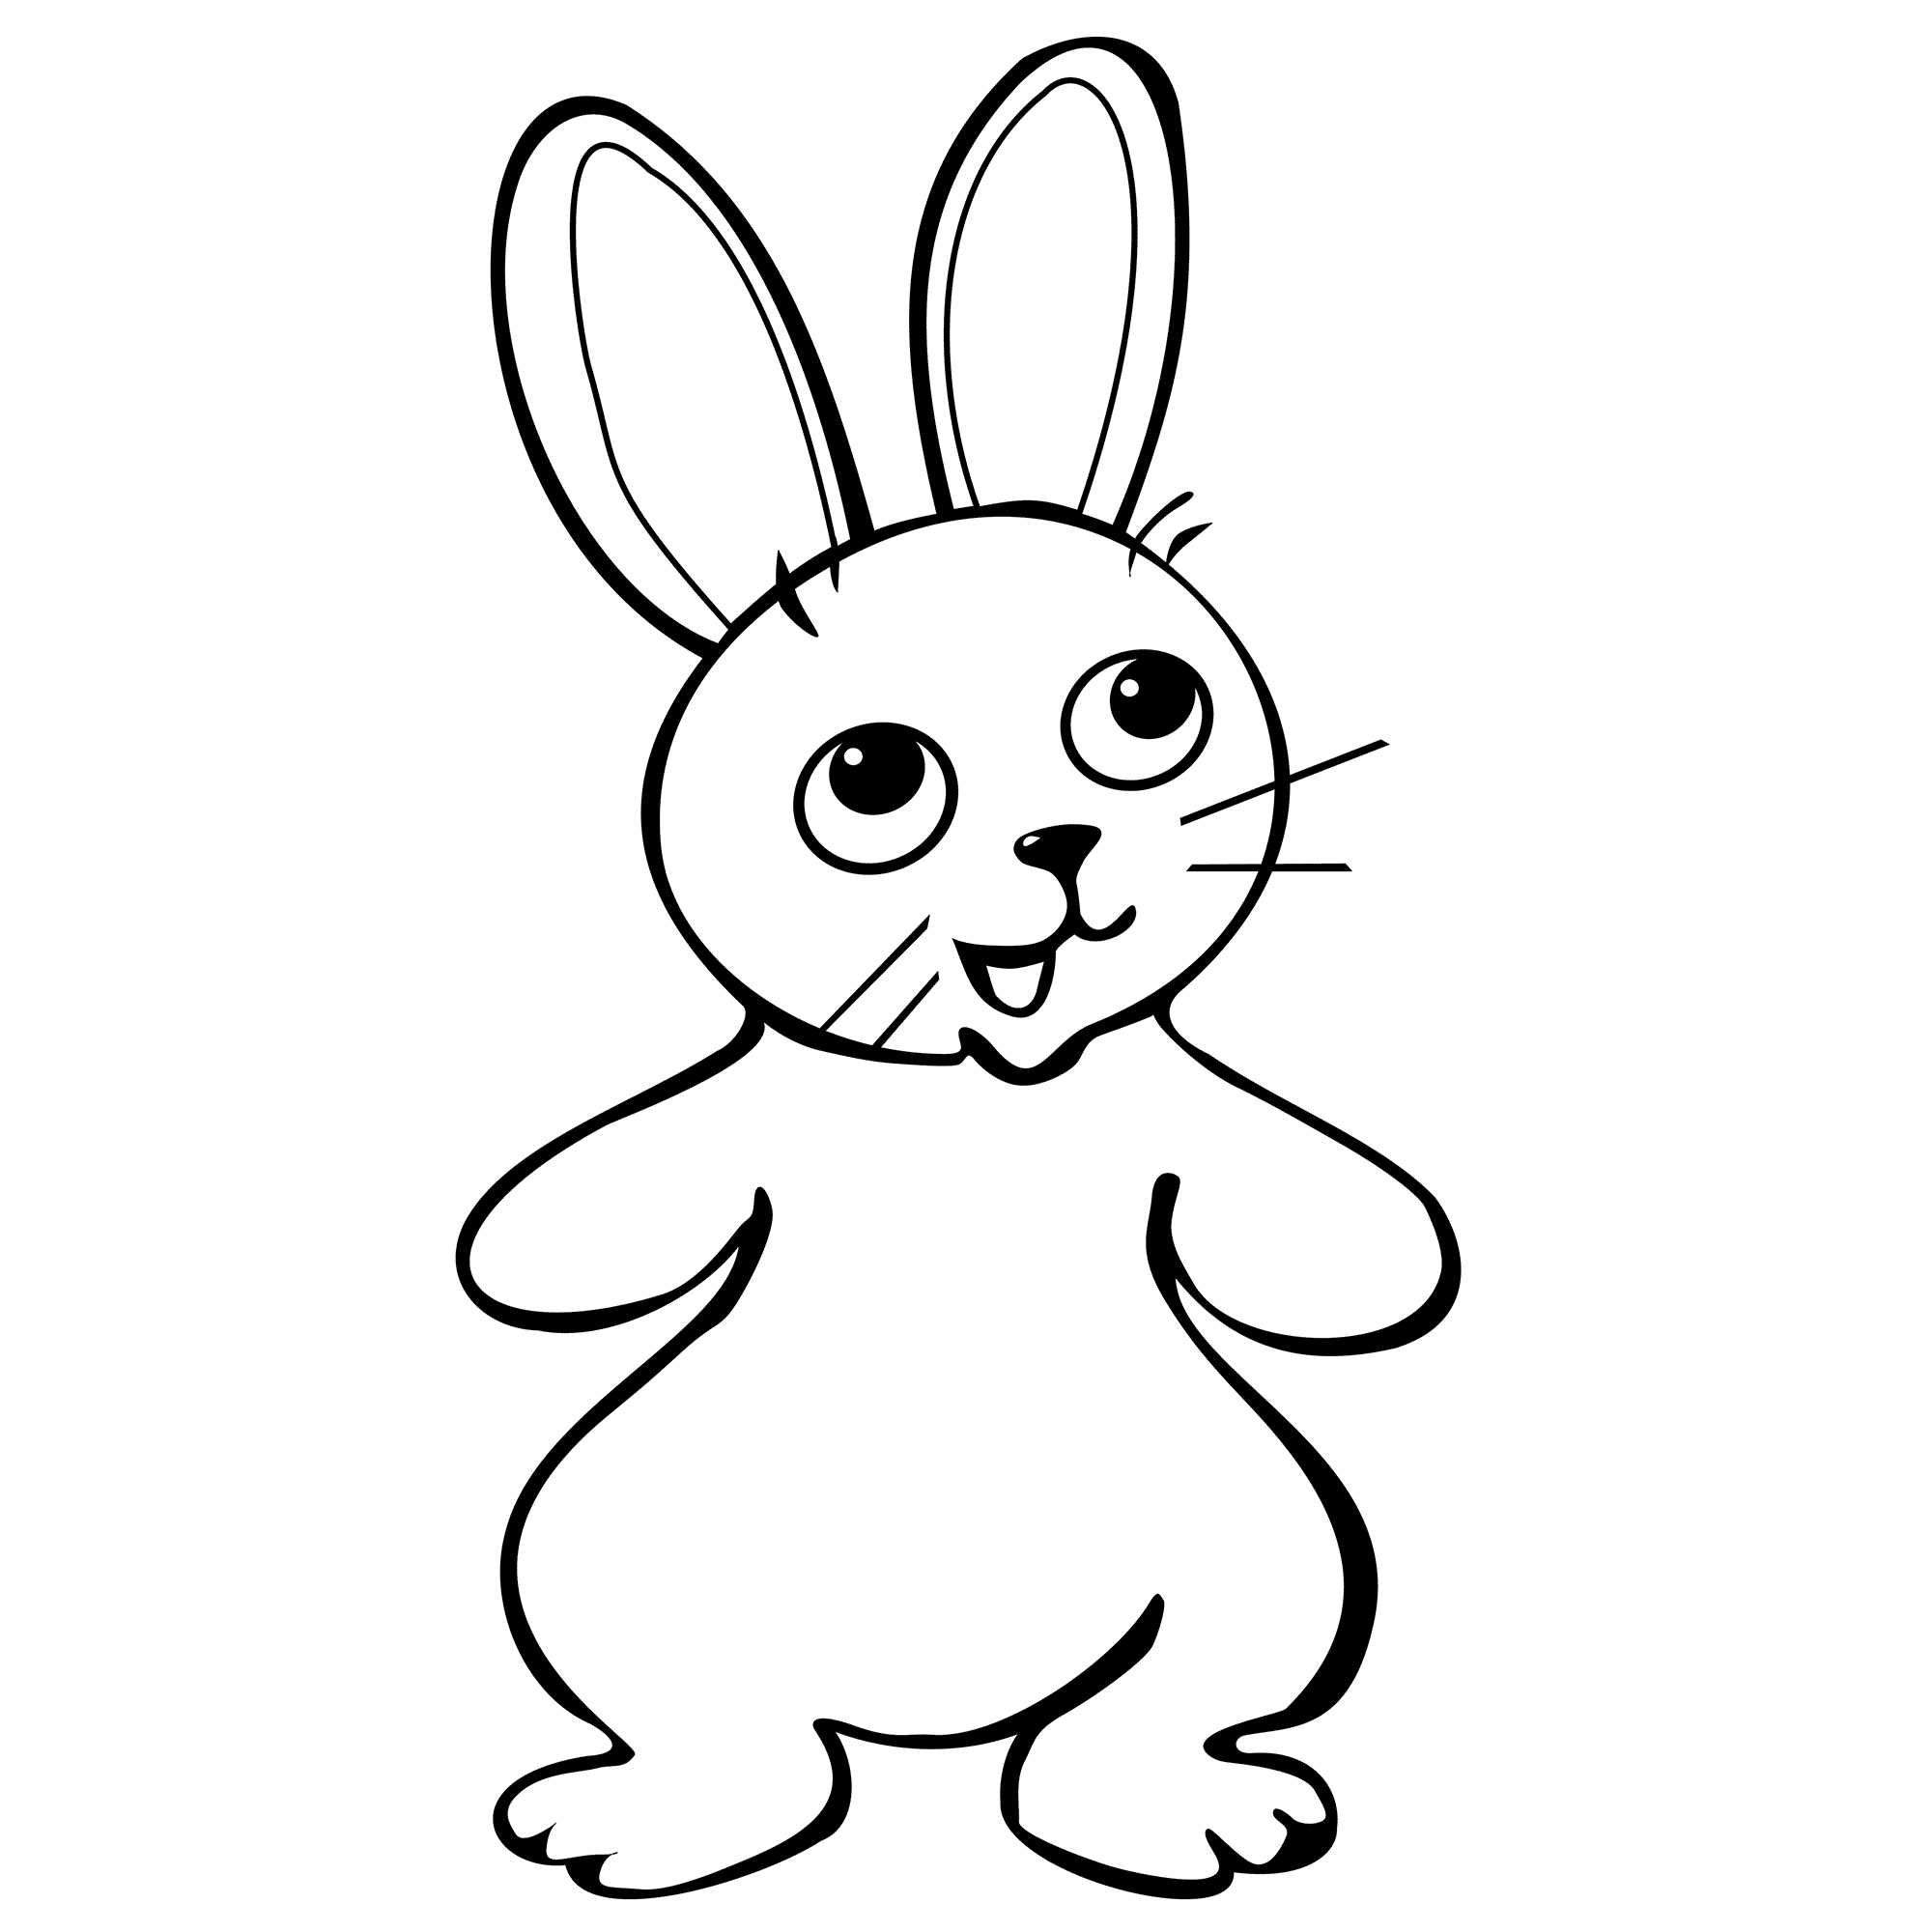 coloring pictures of rabbits free printable rabbit coloring pages for kids coloring pictures of rabbits 